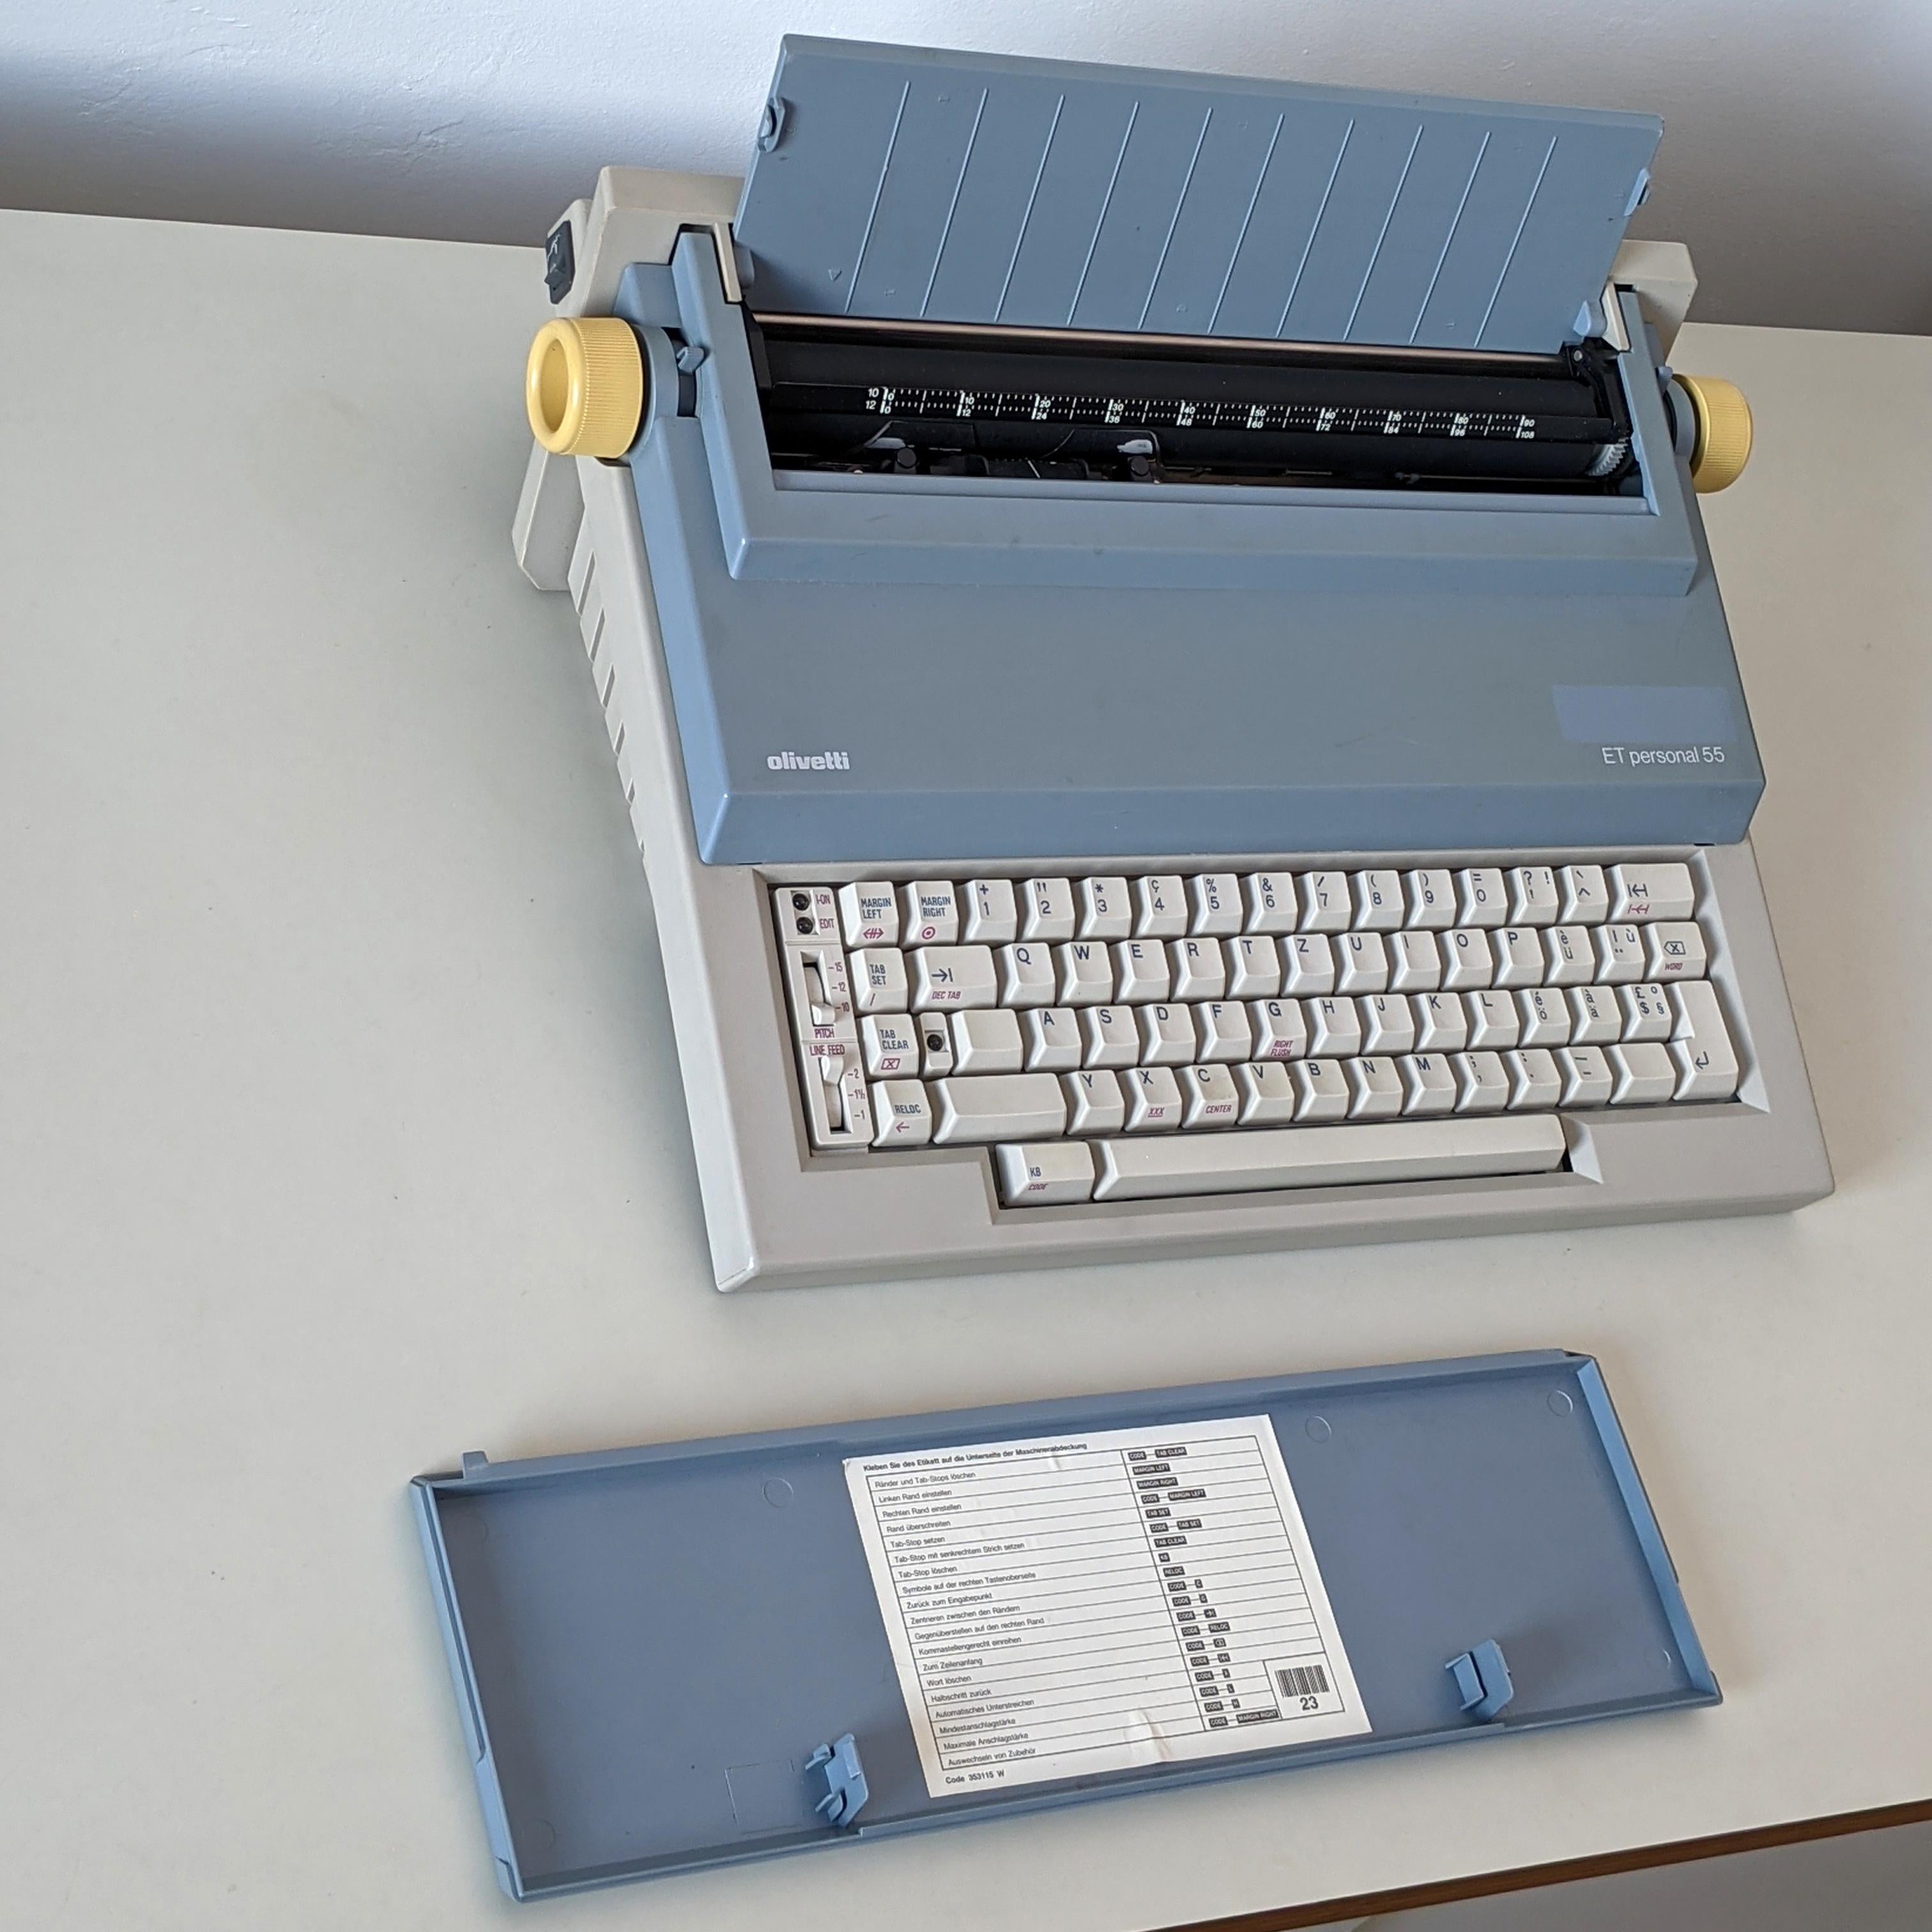 Mario Bellini, ET Personal 55 Portable Typewriter for Olivetti 1985-86 In Good Condition For Sale In London, GB